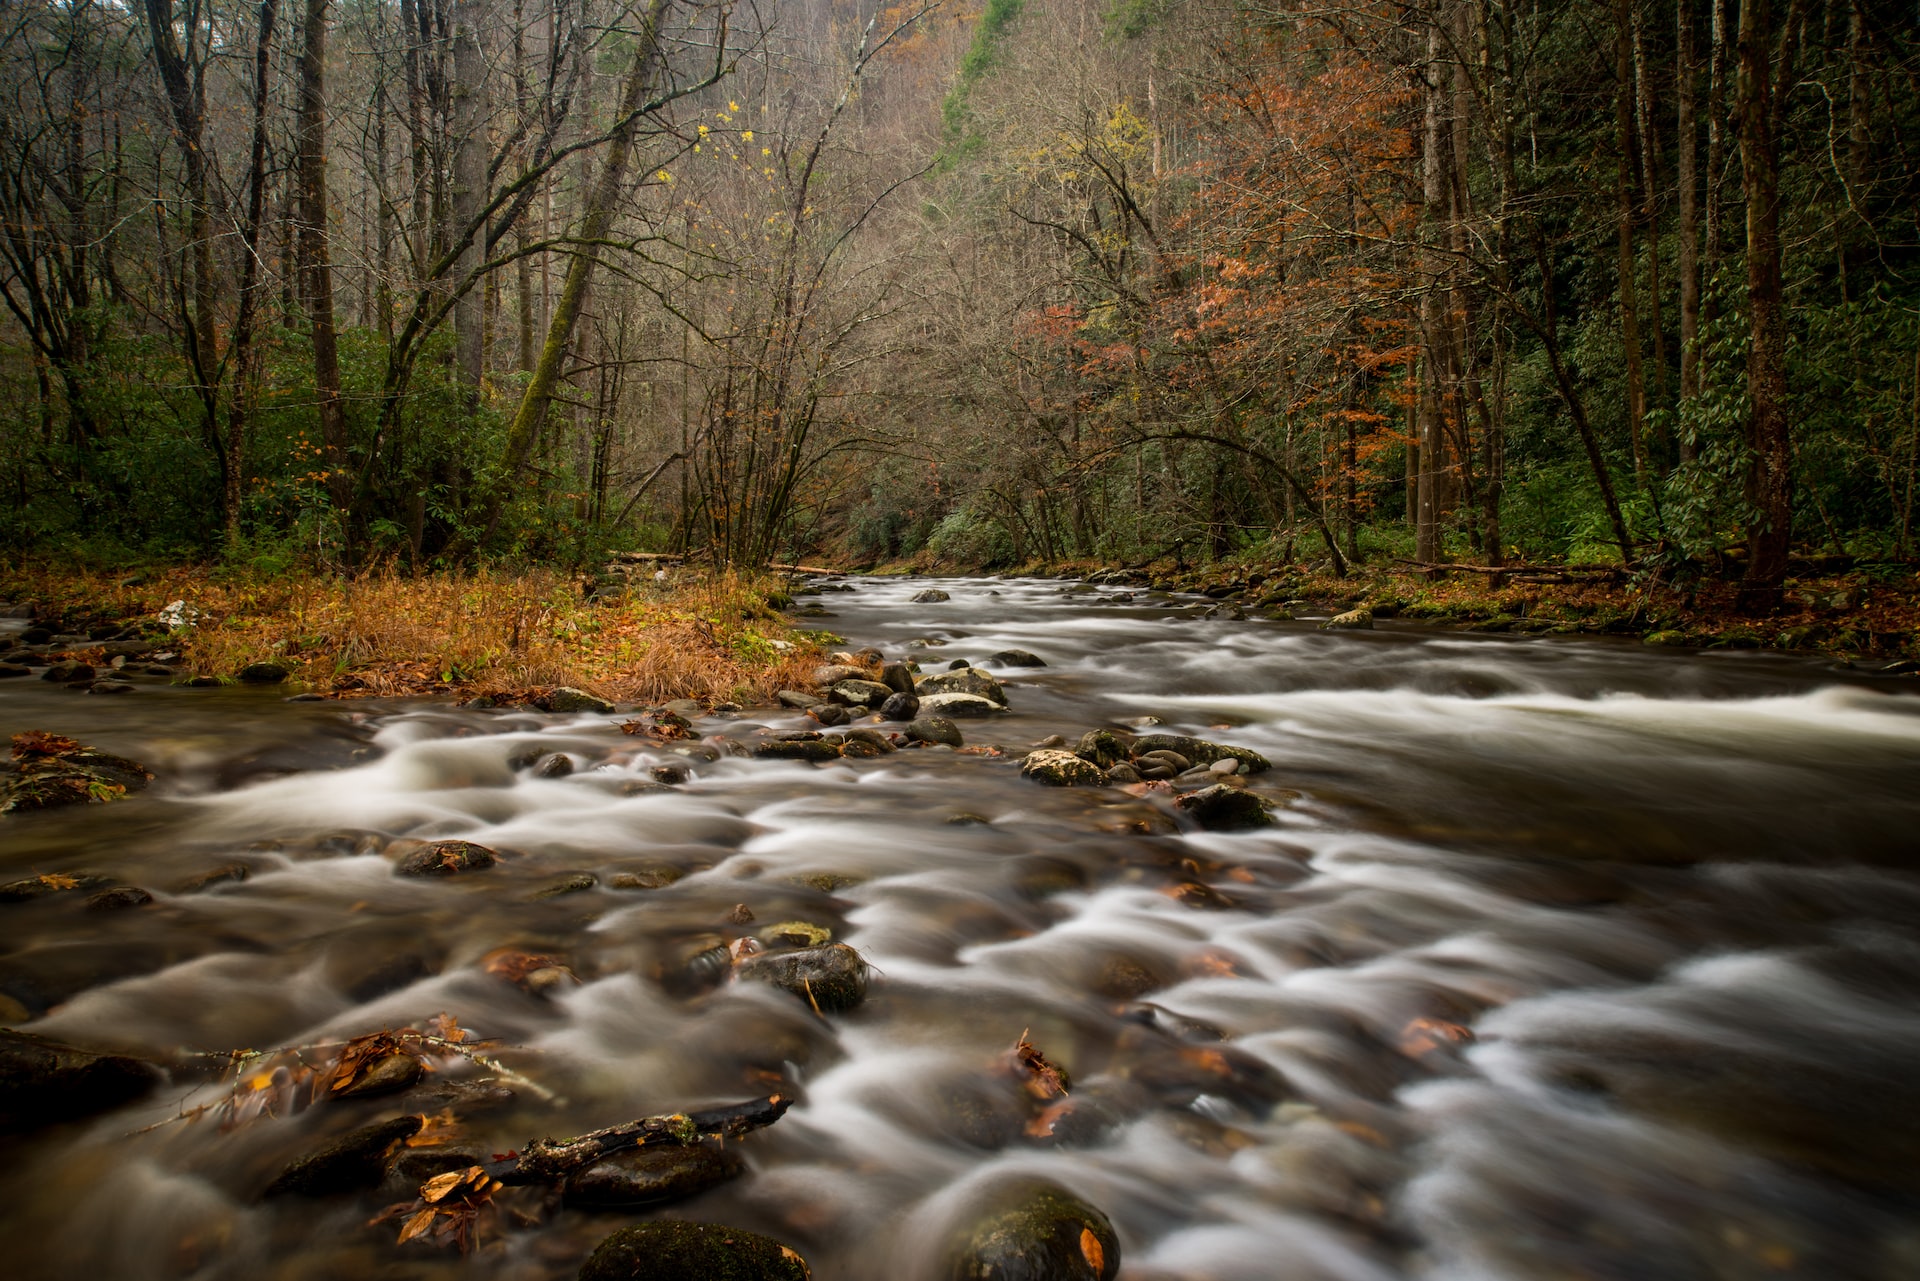 Timelapse photography of the stream at Tremont in fall.